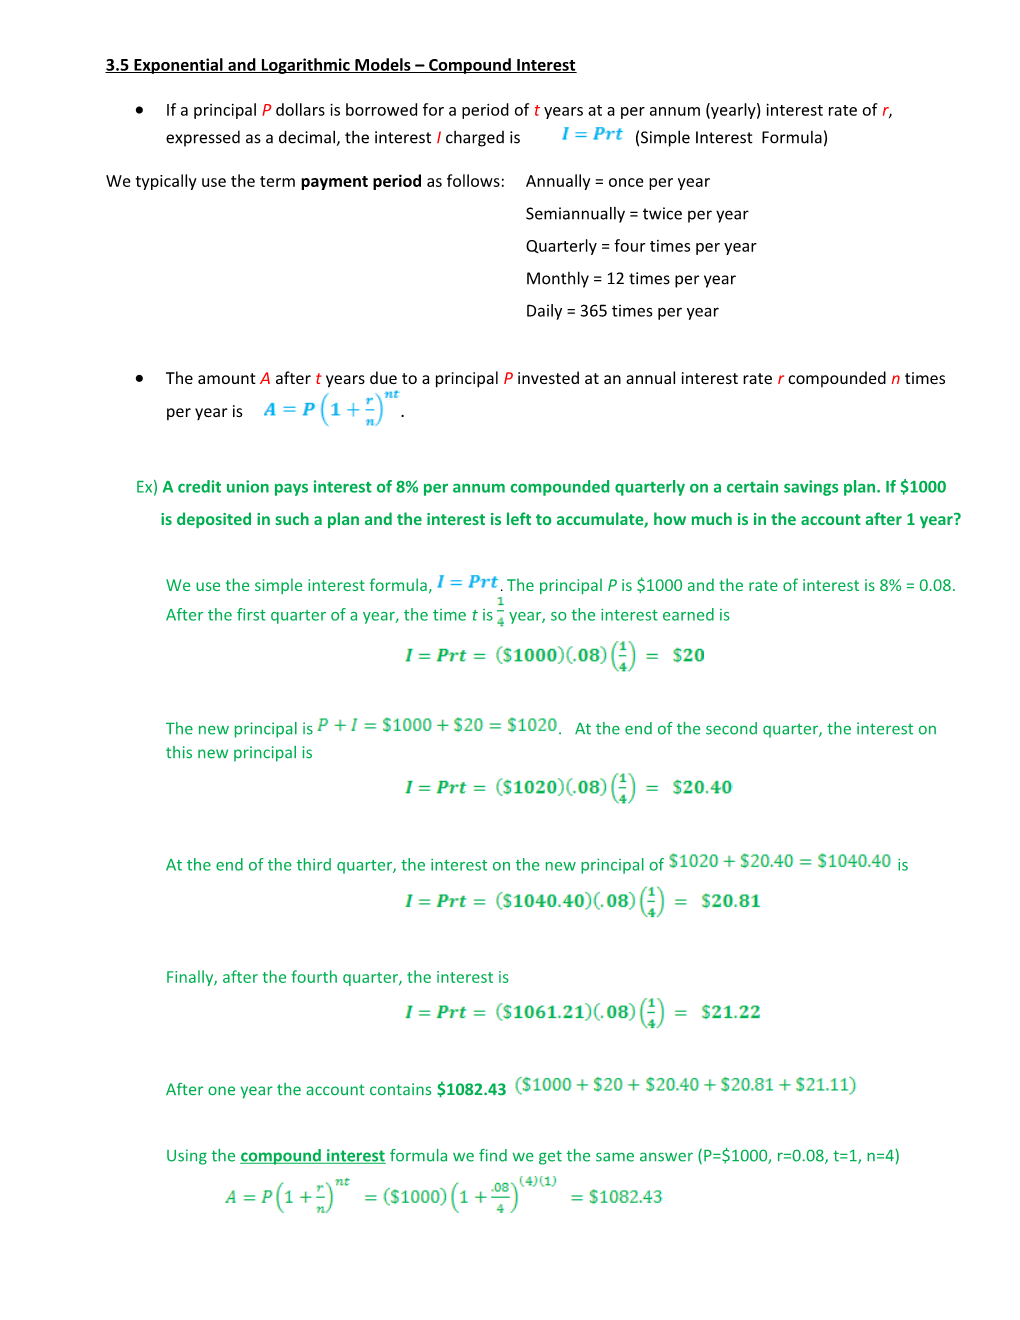 3.5 Exponential and Logarithmic Models Compound Interest